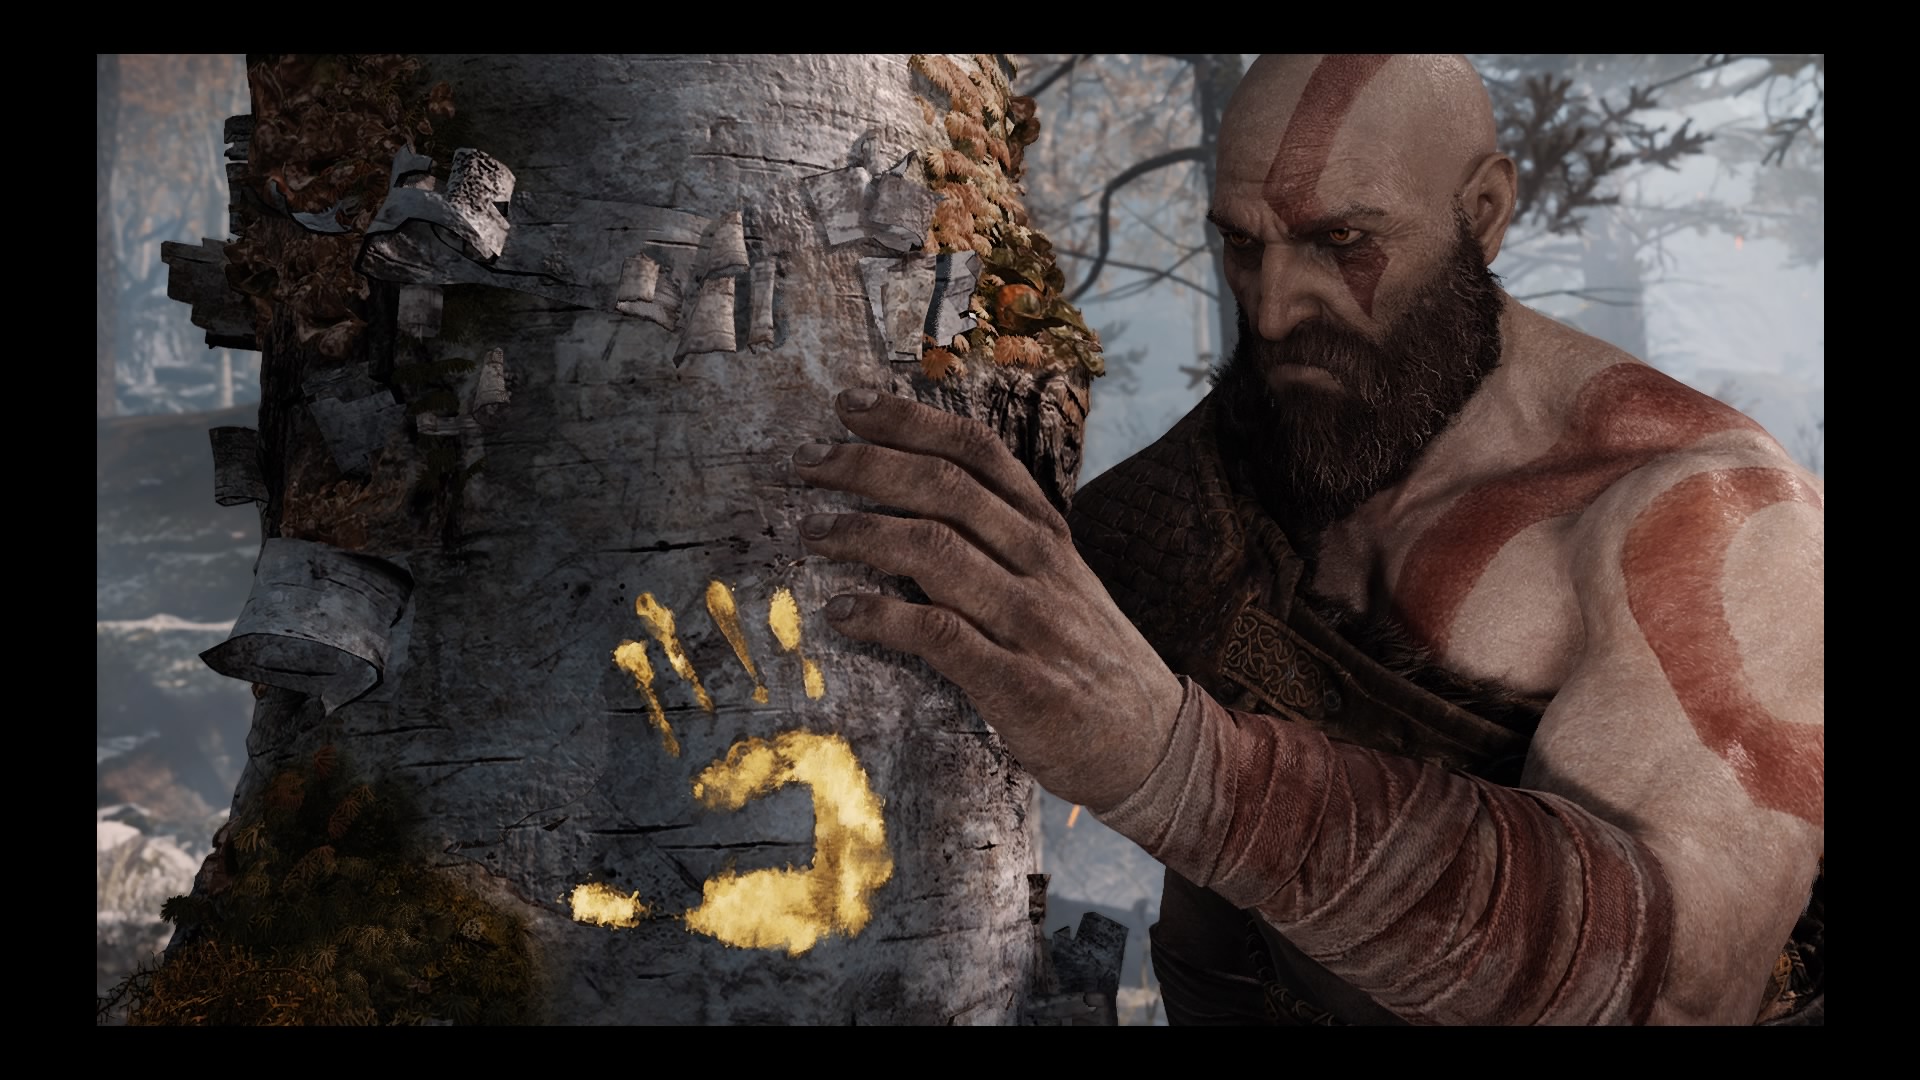 General 1920x1080 Kratos God of War (2018) God of War PlayStation 4 video games video game characters